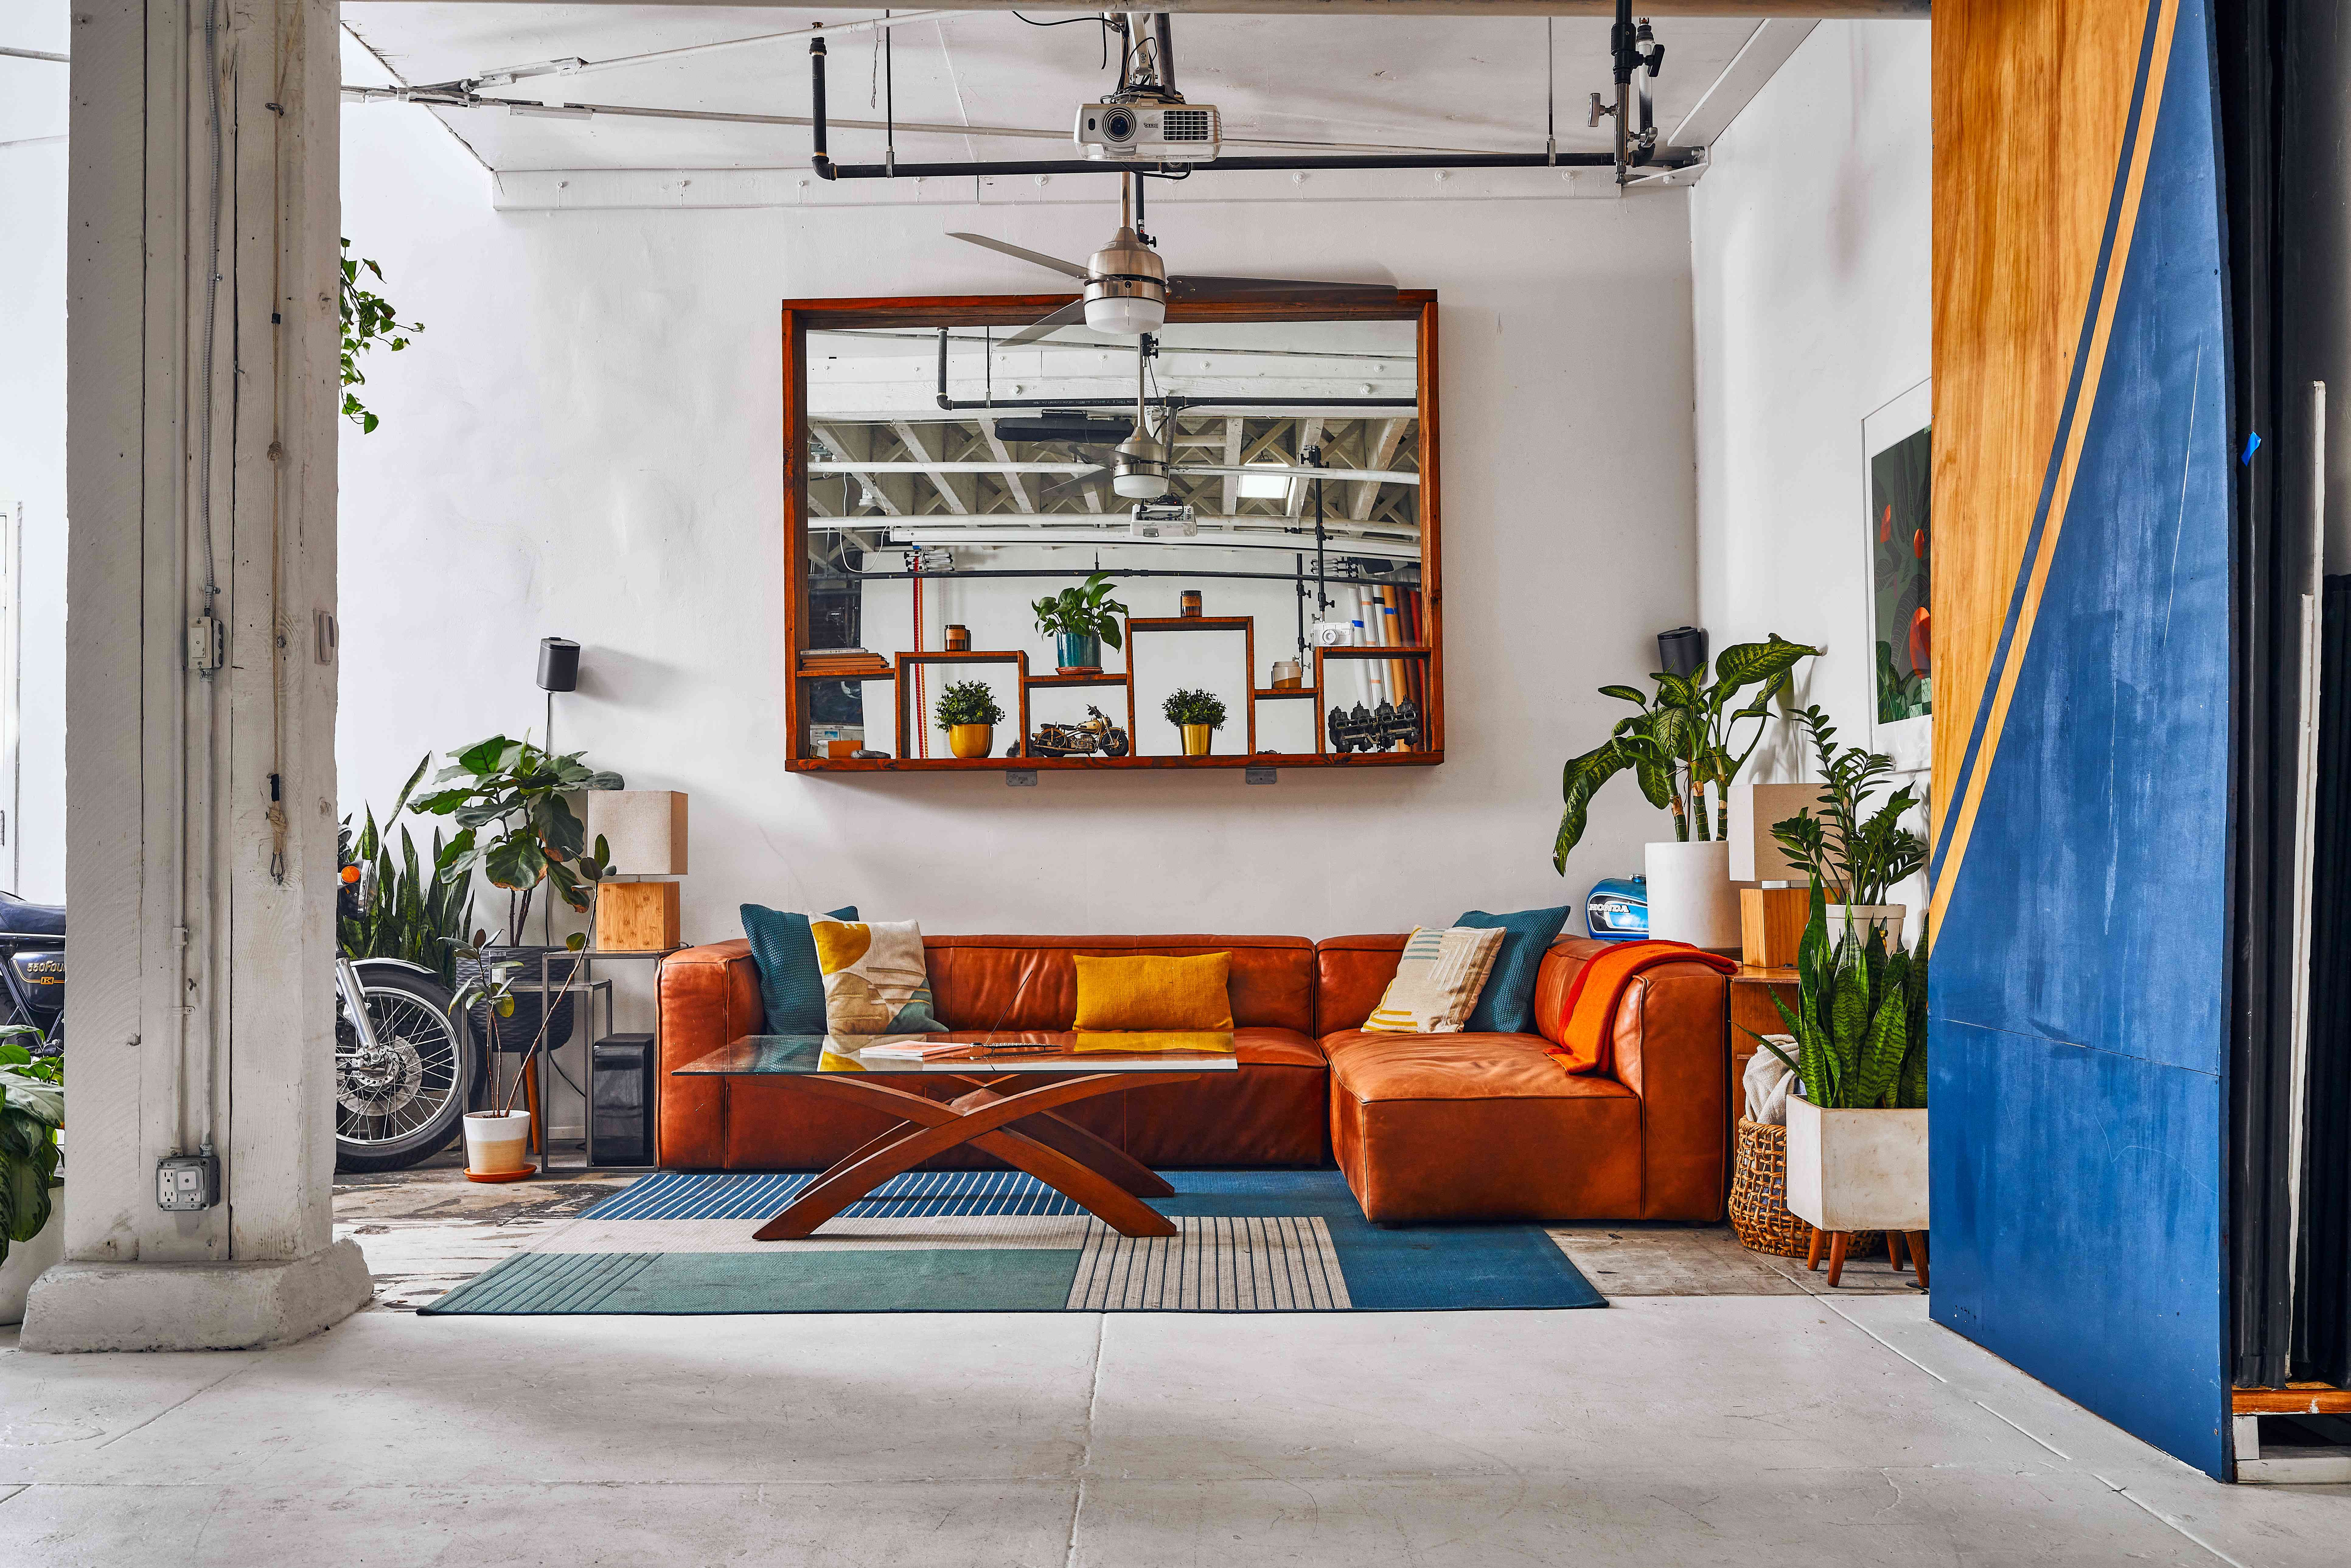 This LA Loft Was Transformed into a Cool Home With Color and Custom Storage